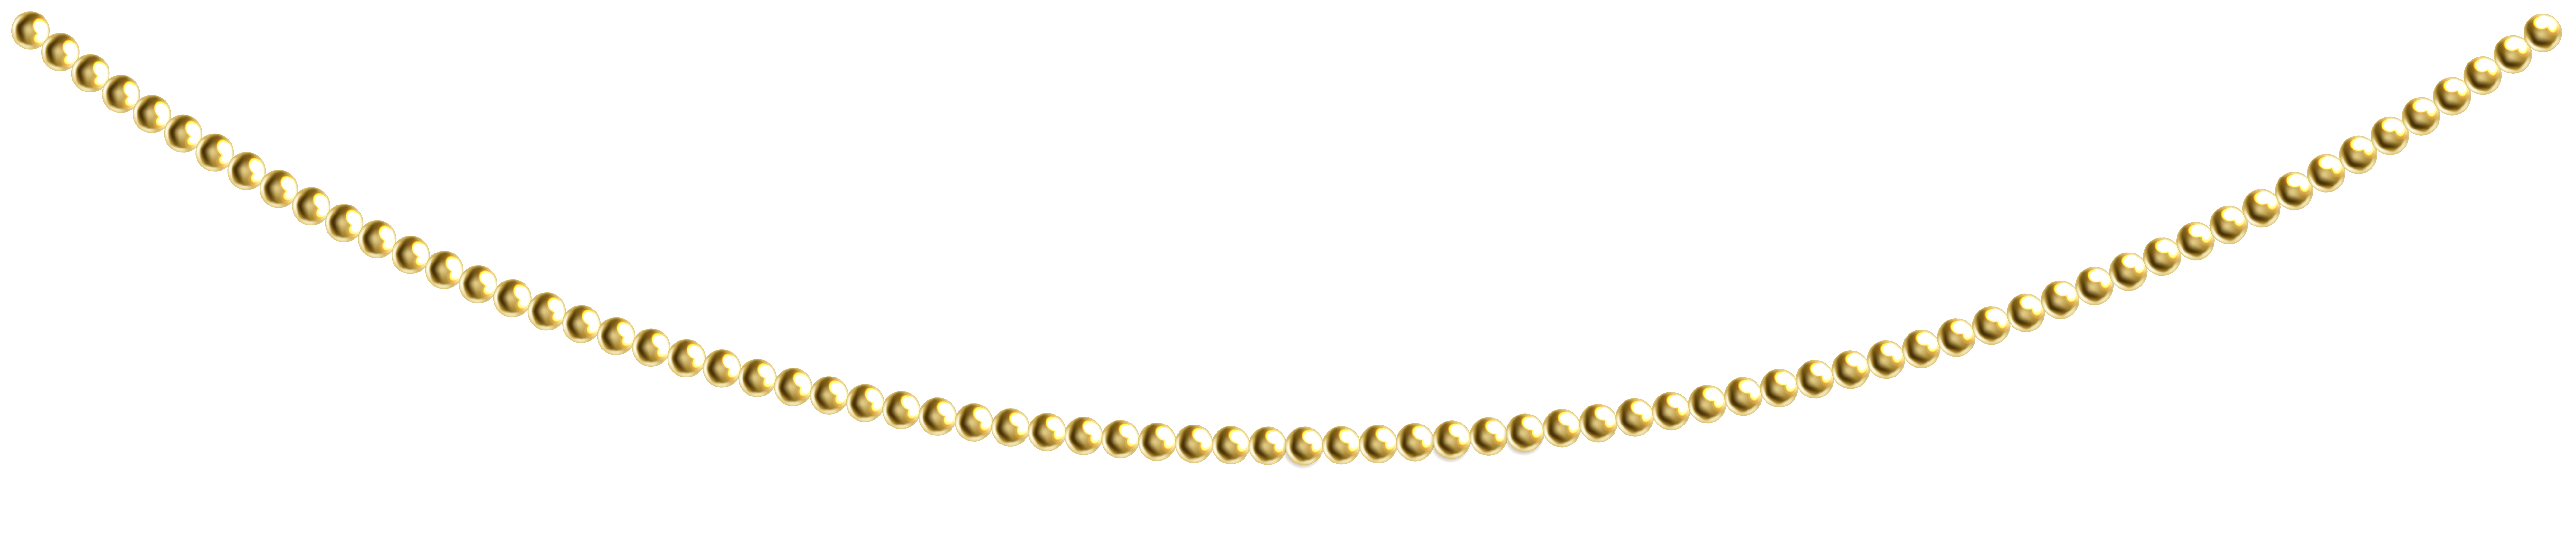 Pearl clipart gold bead. Beads decoration png clip